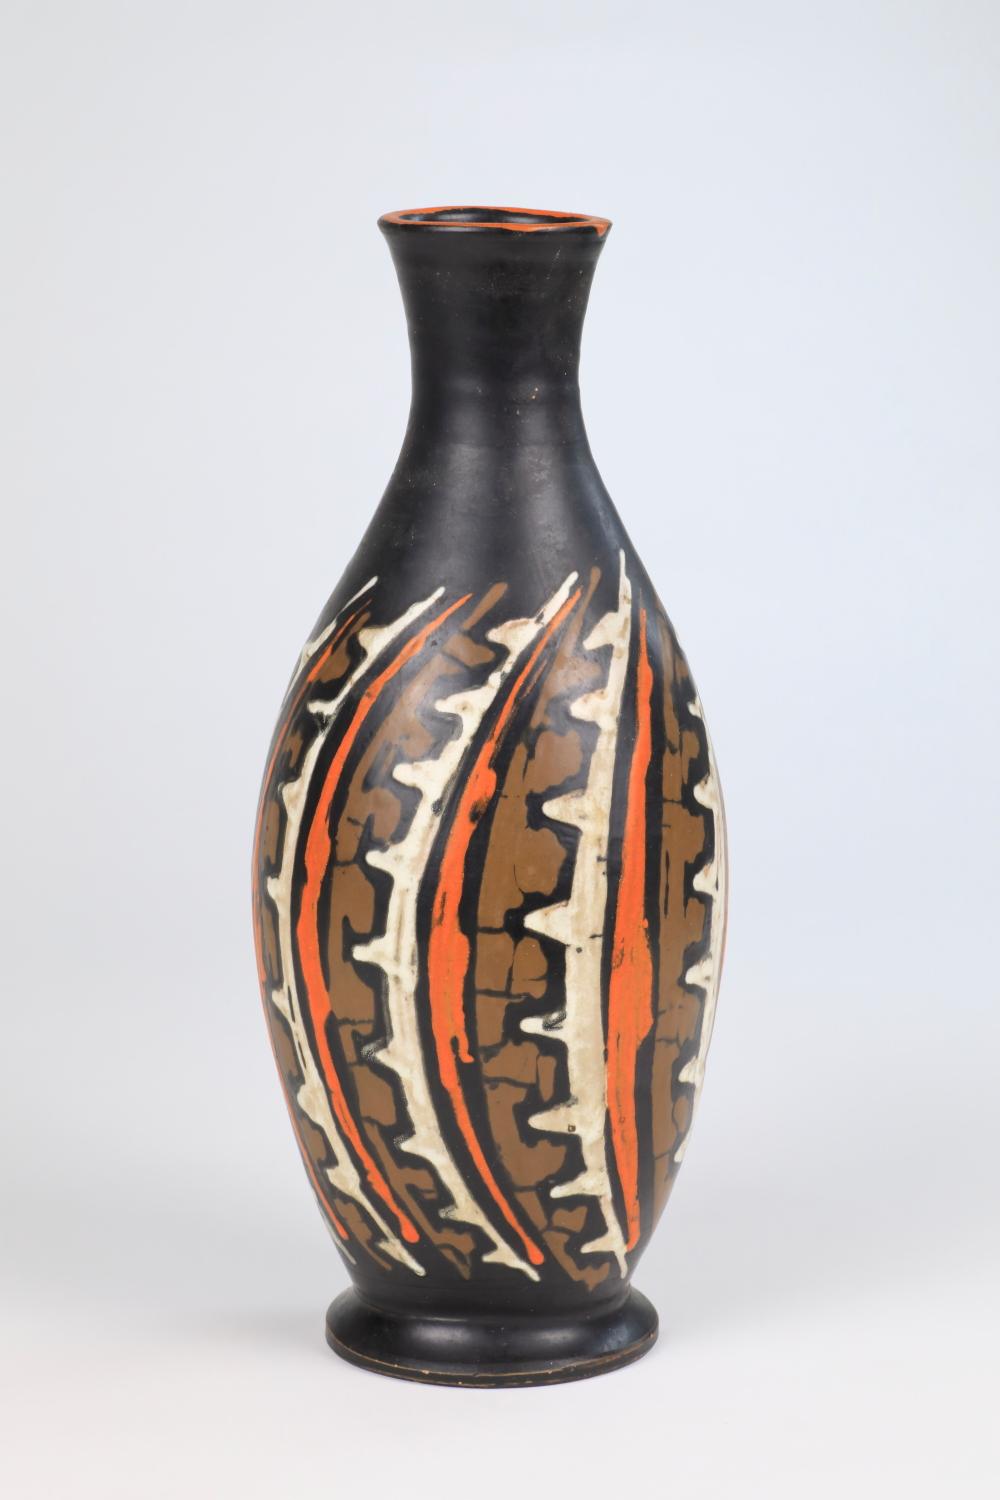 
The ceramic work of Livia Gorka stands out as truly unique and special, bearing the hallmark of her masterful craftsmanship, deep connection to nature, and innovative approach to pottery.

At the heart of her distinctive style lies Gorka's